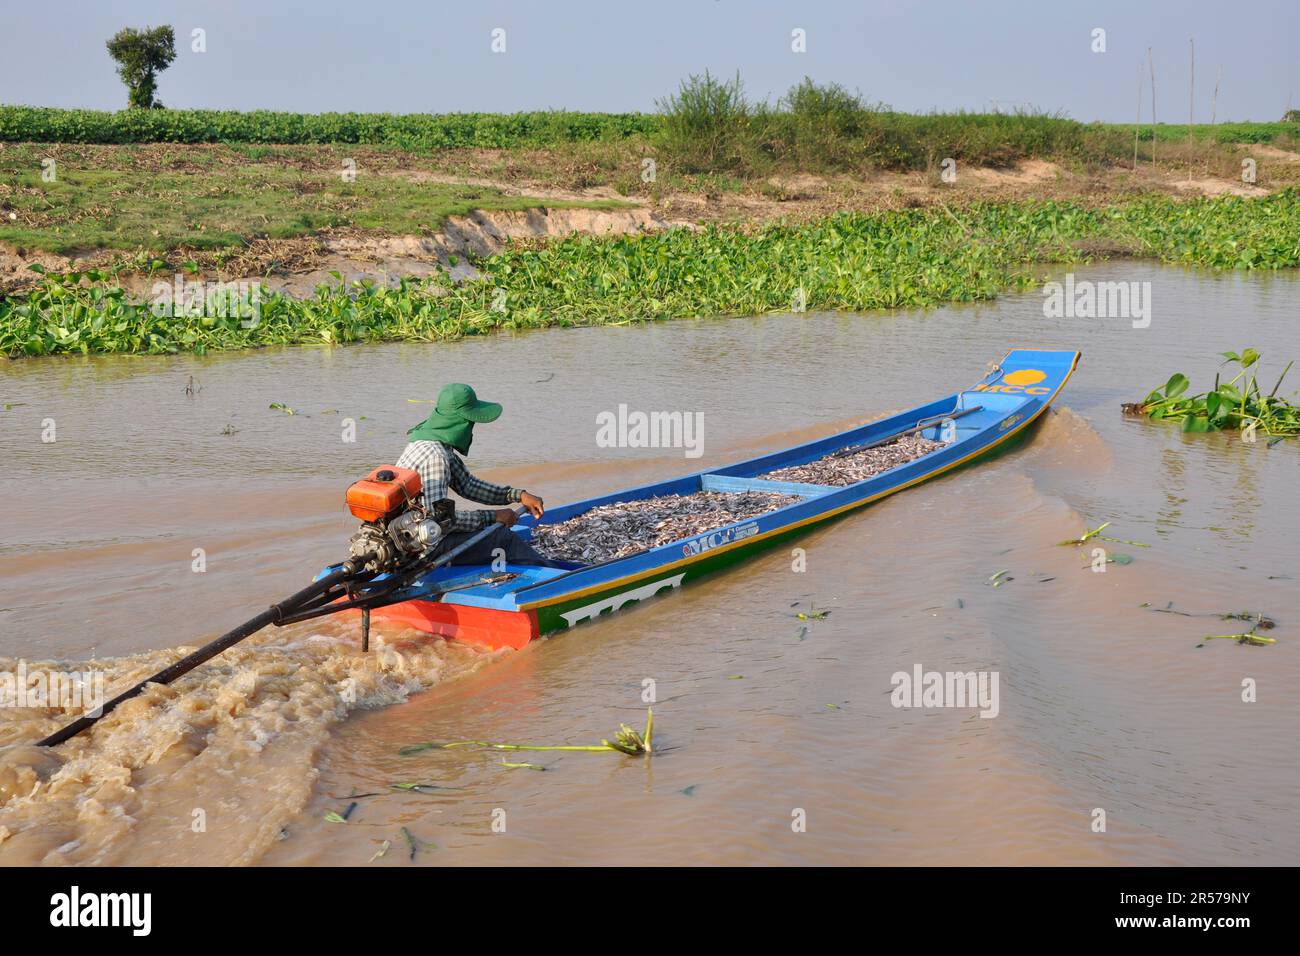 History. People. Outdoors. Horizontal. Nobody. Mekong. Kompong Khleang. Kampuchea. Indoors. Indochina. Day. Geography. River. East. Cambodia. Boats. Boat. Asia. South. Traditional. Travel. Village Stock Photo